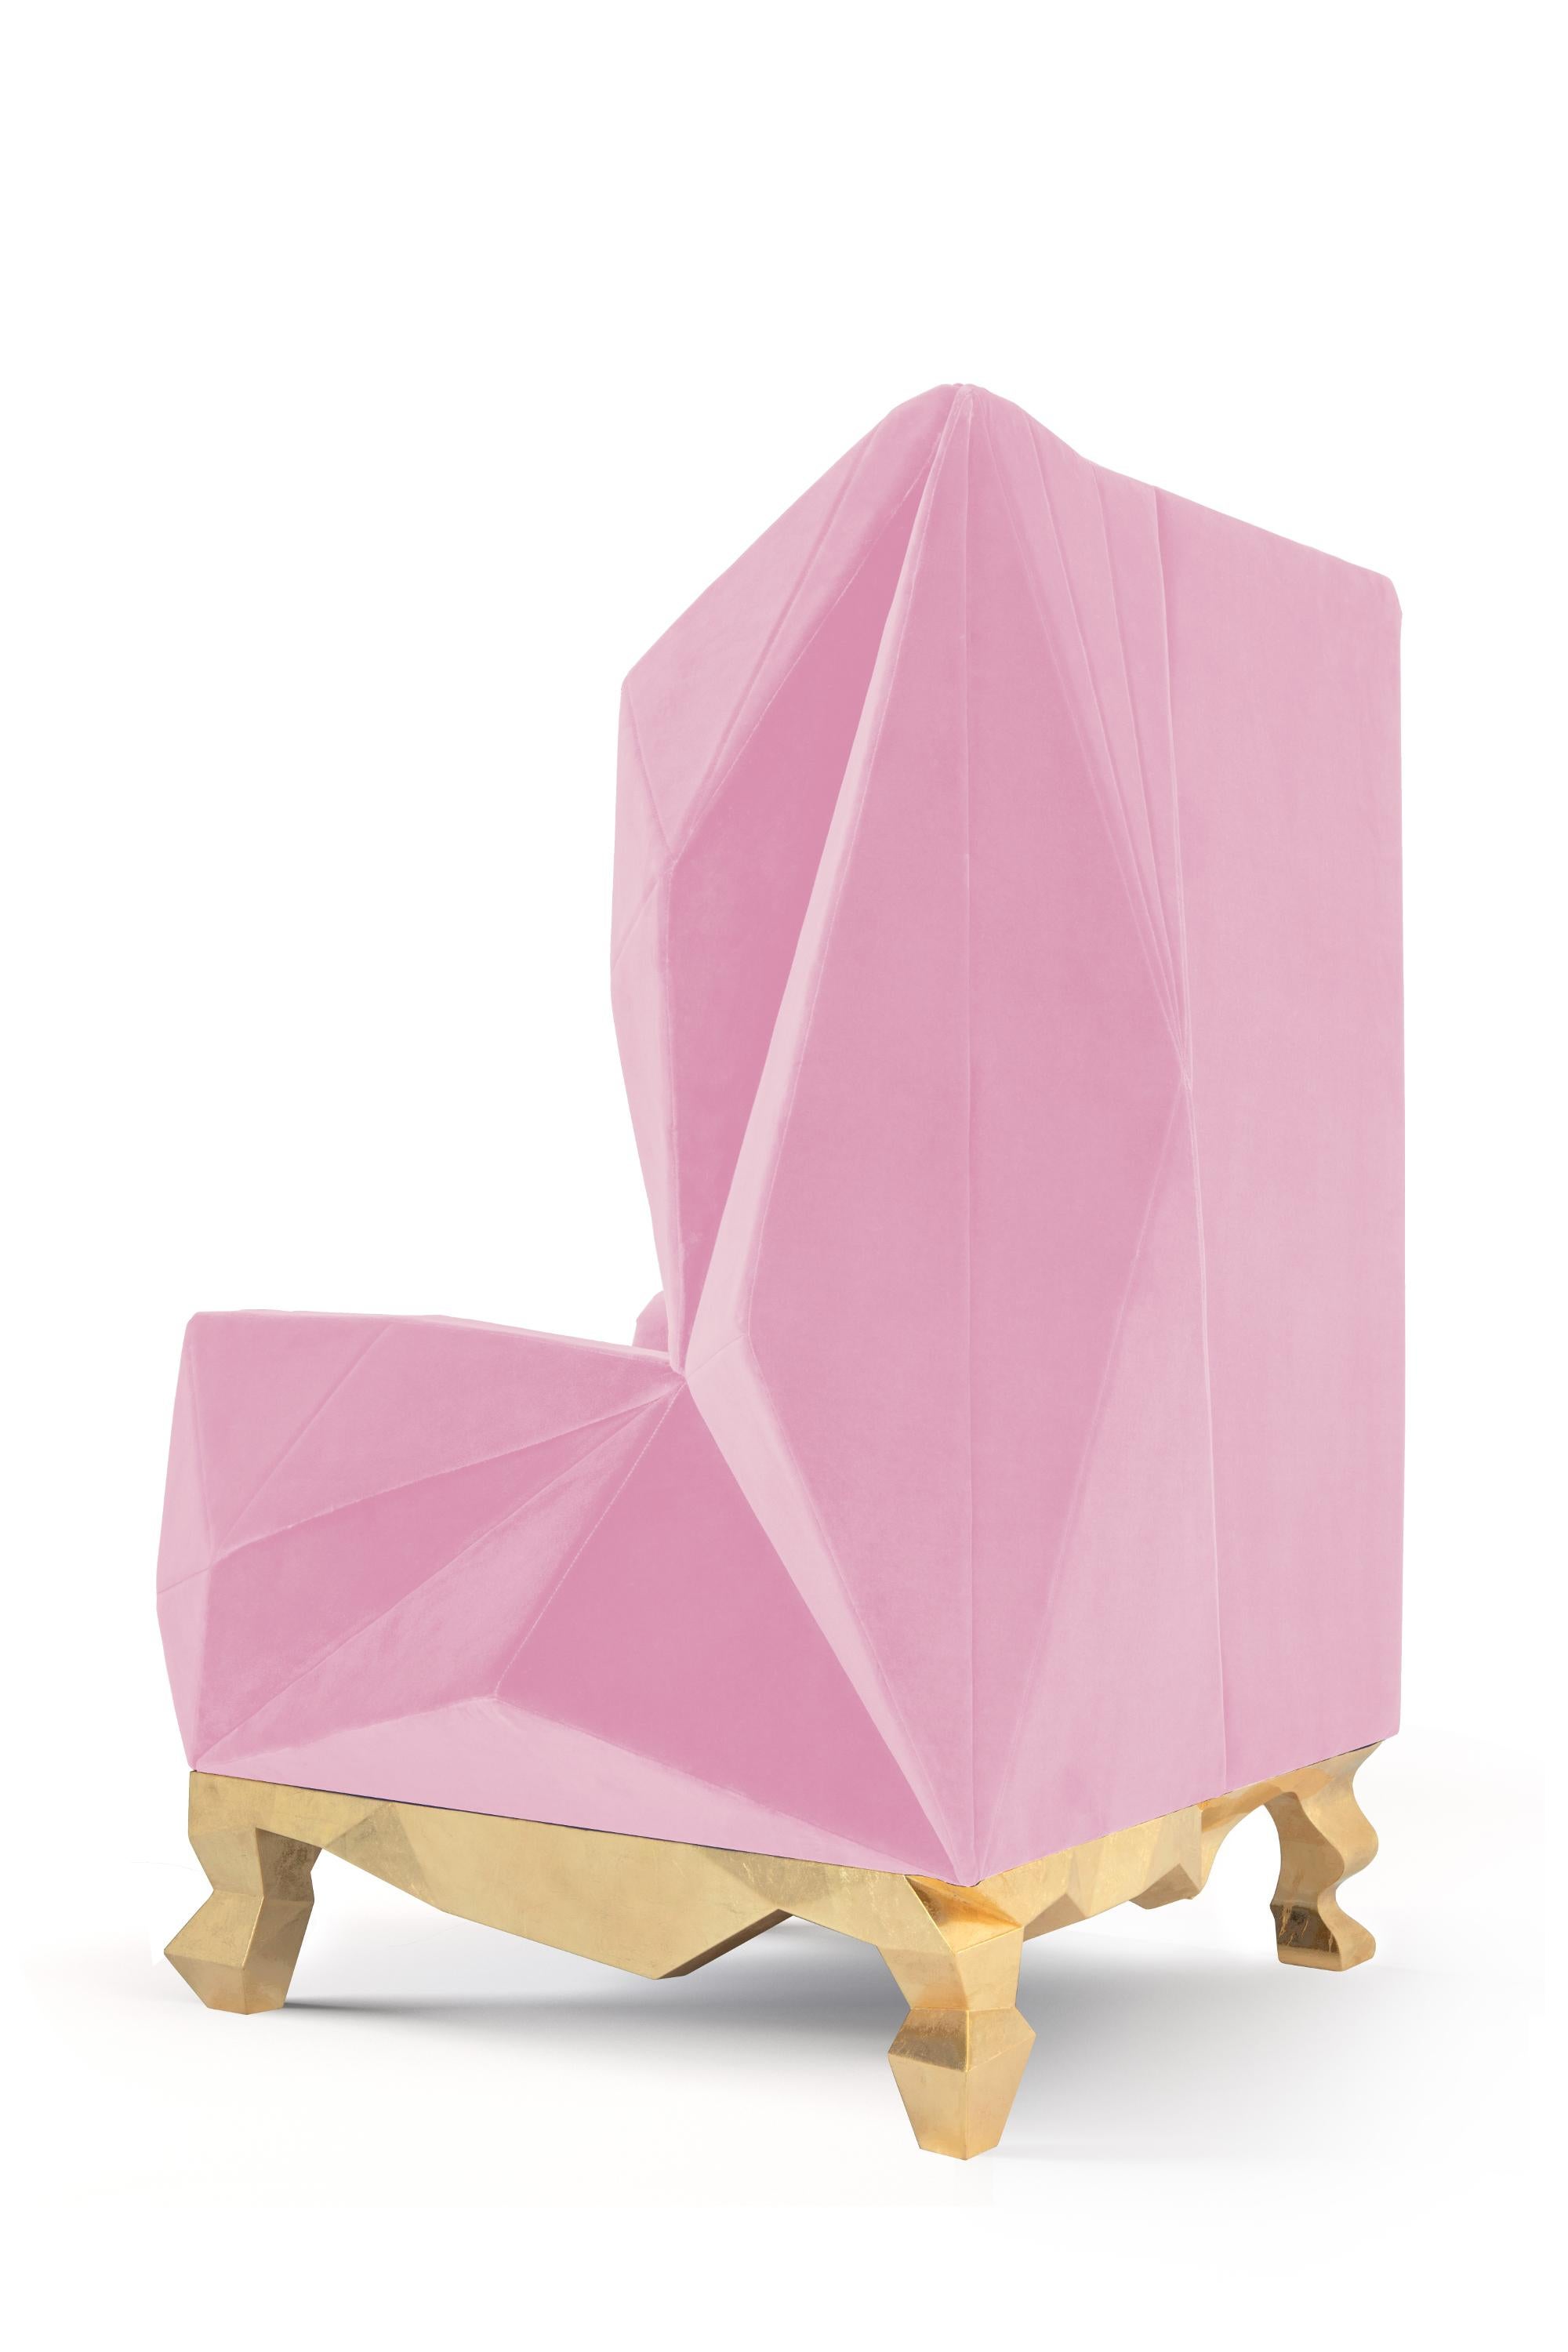 Velvet pink rockchair by Royal Stranger
Dimensions: width 98 cm x height 135 cm x depth 99 cm
Different upholstery colors and finishes are available. Brass, Copper or Stainless Steel in polished or brushed finish.
Materials: velvet on the top of